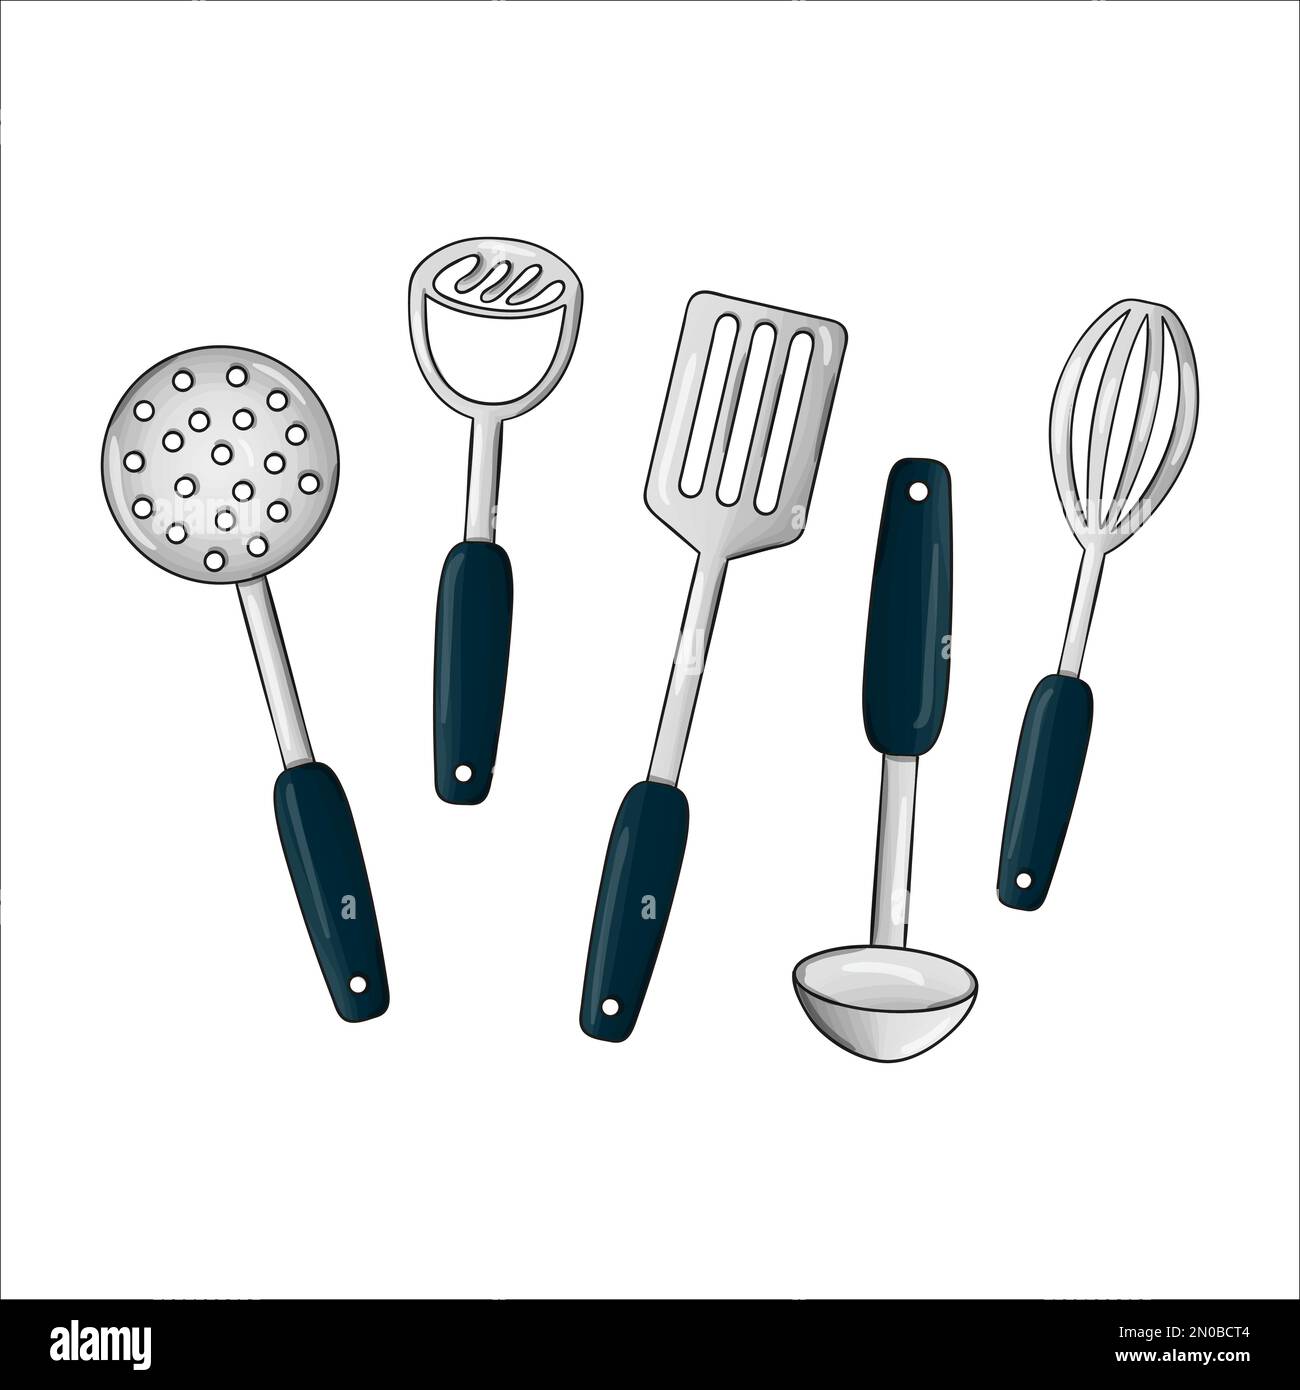 https://c8.alamy.com/comp/2N0BCT4/vector-colored-dinnerware-set-kitchen-tool-icons-isolated-on-white-background-cartoon-style-cooking-equipment-skimmer-potato-musher-ladle-vector-2N0BCT4.jpg